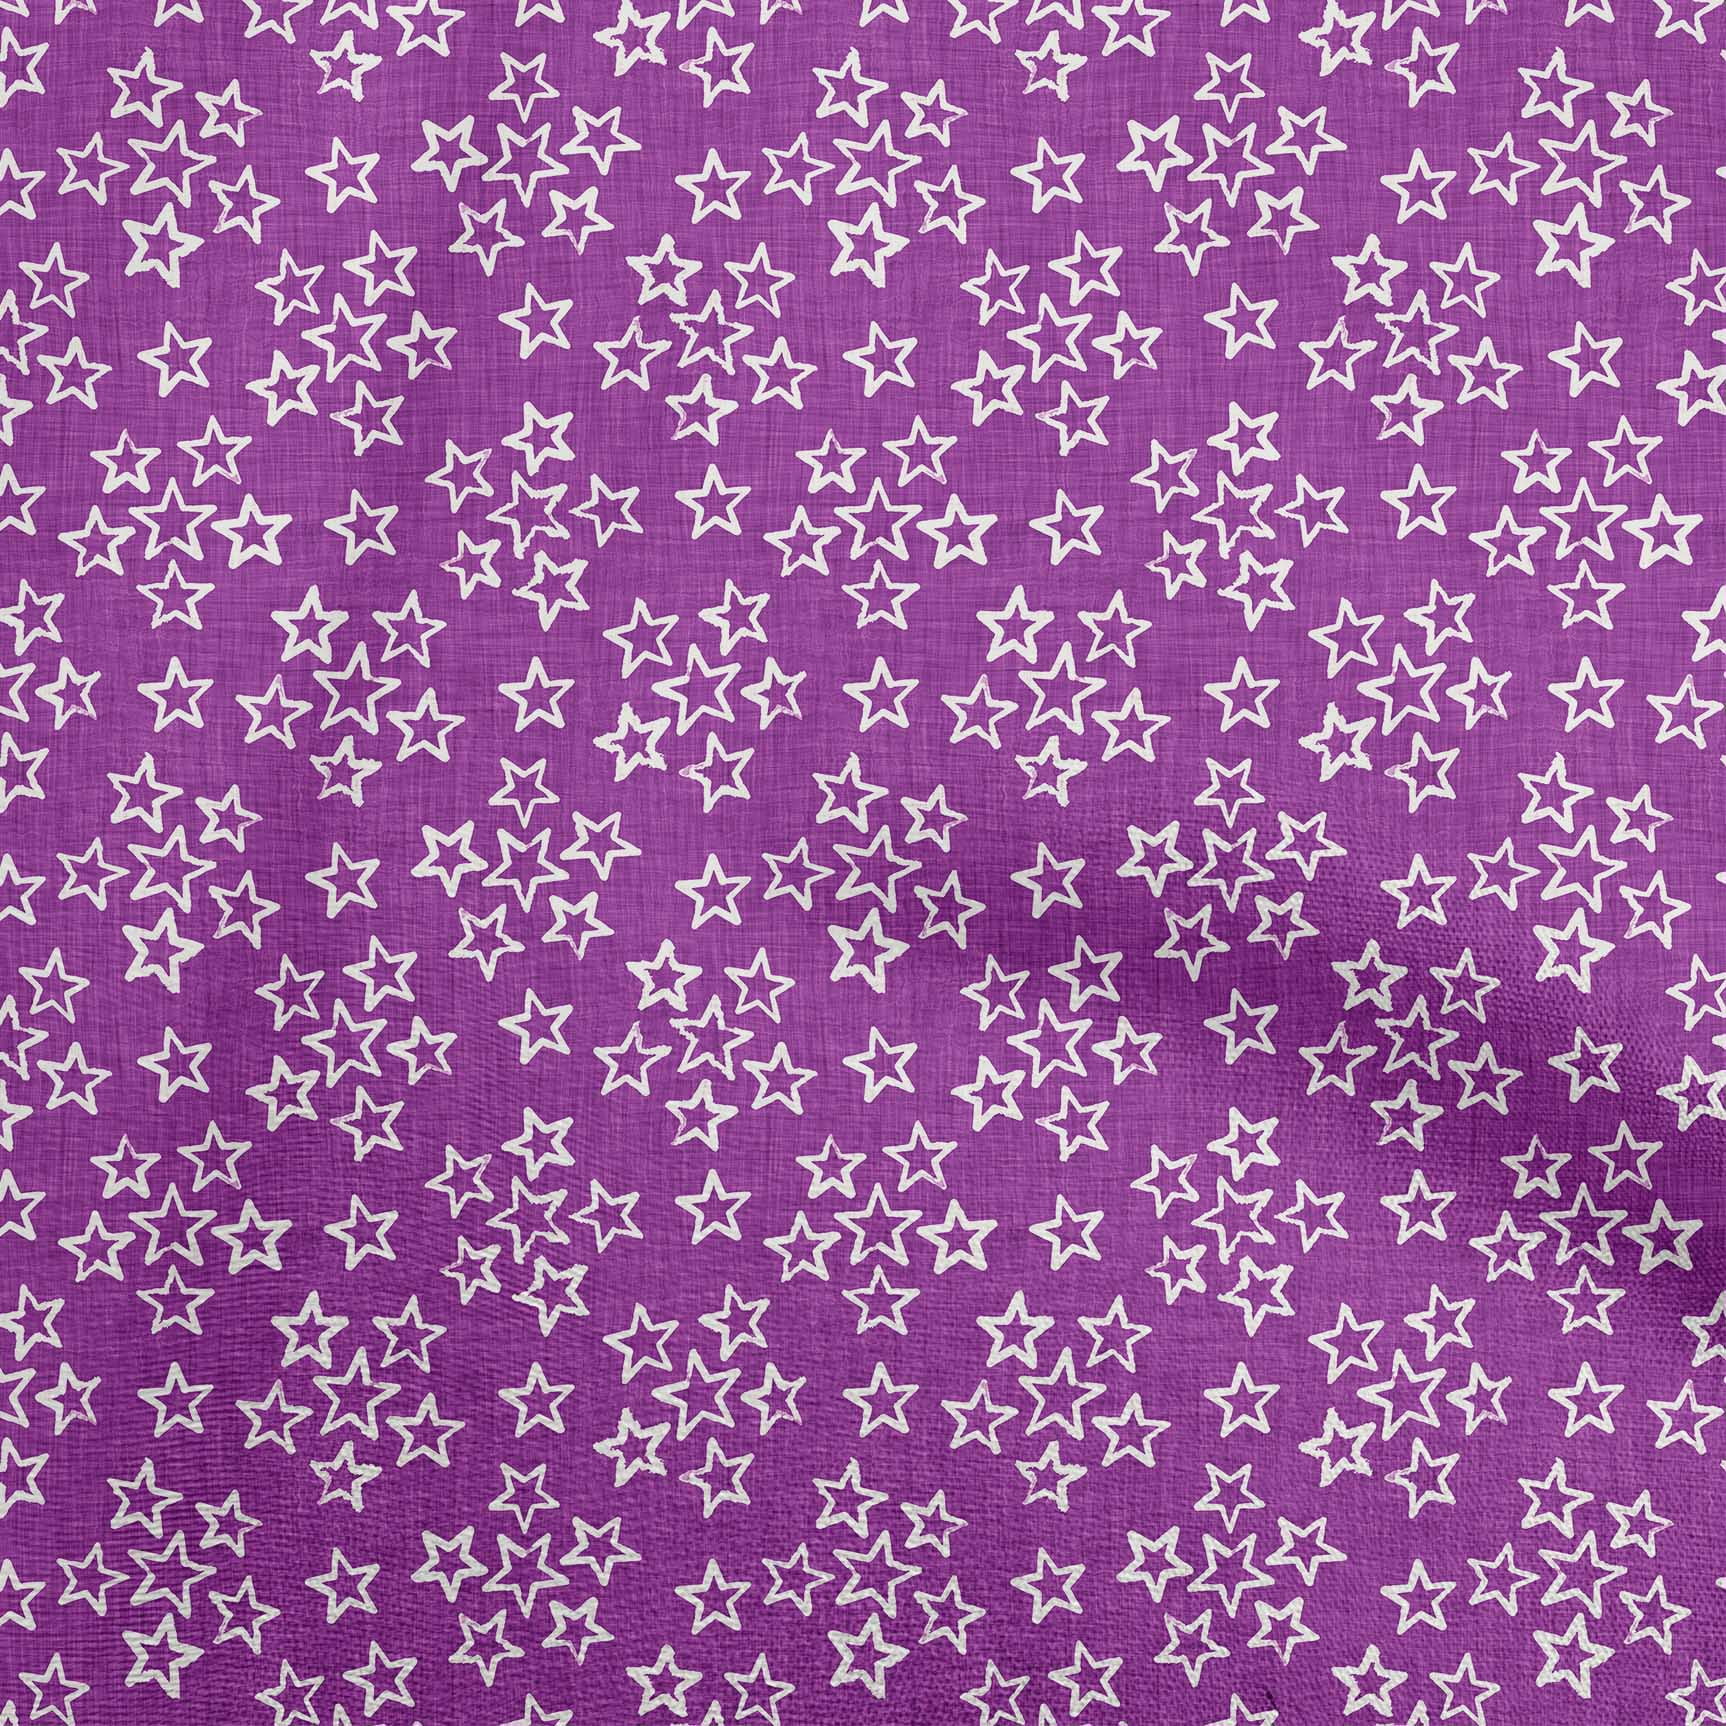 oneOone Viscose Jersey Purple Fabric Asian Block Dress Material Fabric Print  Fabric By The Yard 60 Inch Wide 